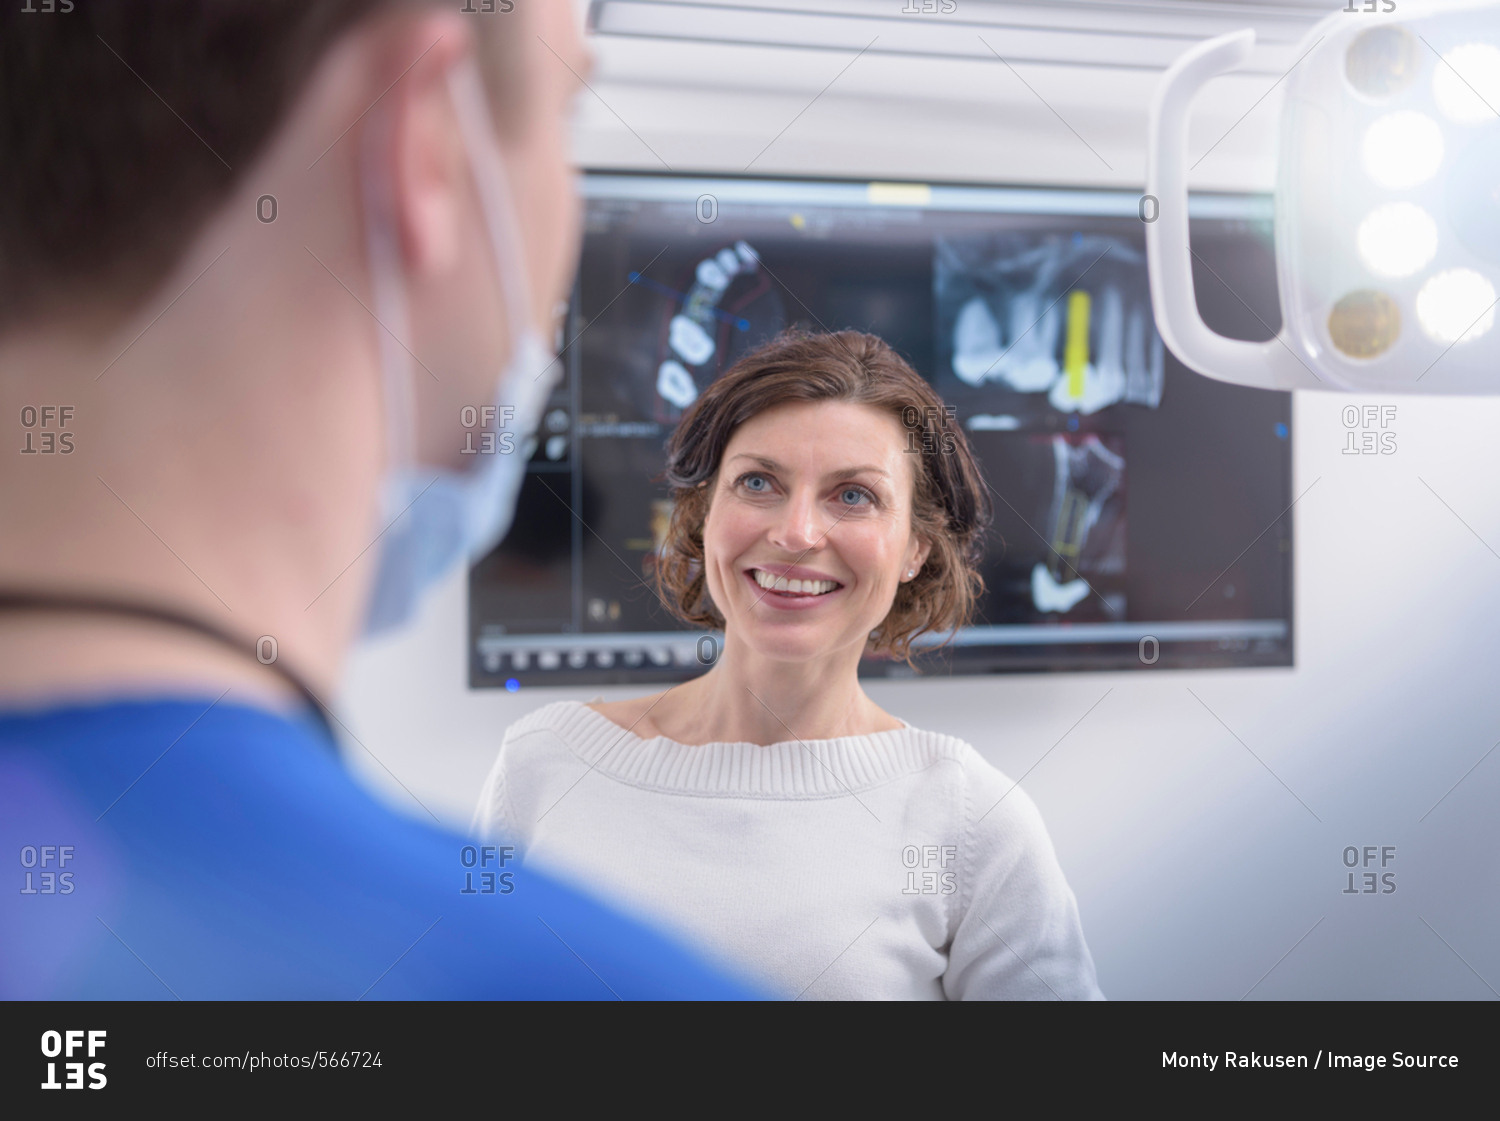 Dentist showing x-rays on screen to patient in dental surgery